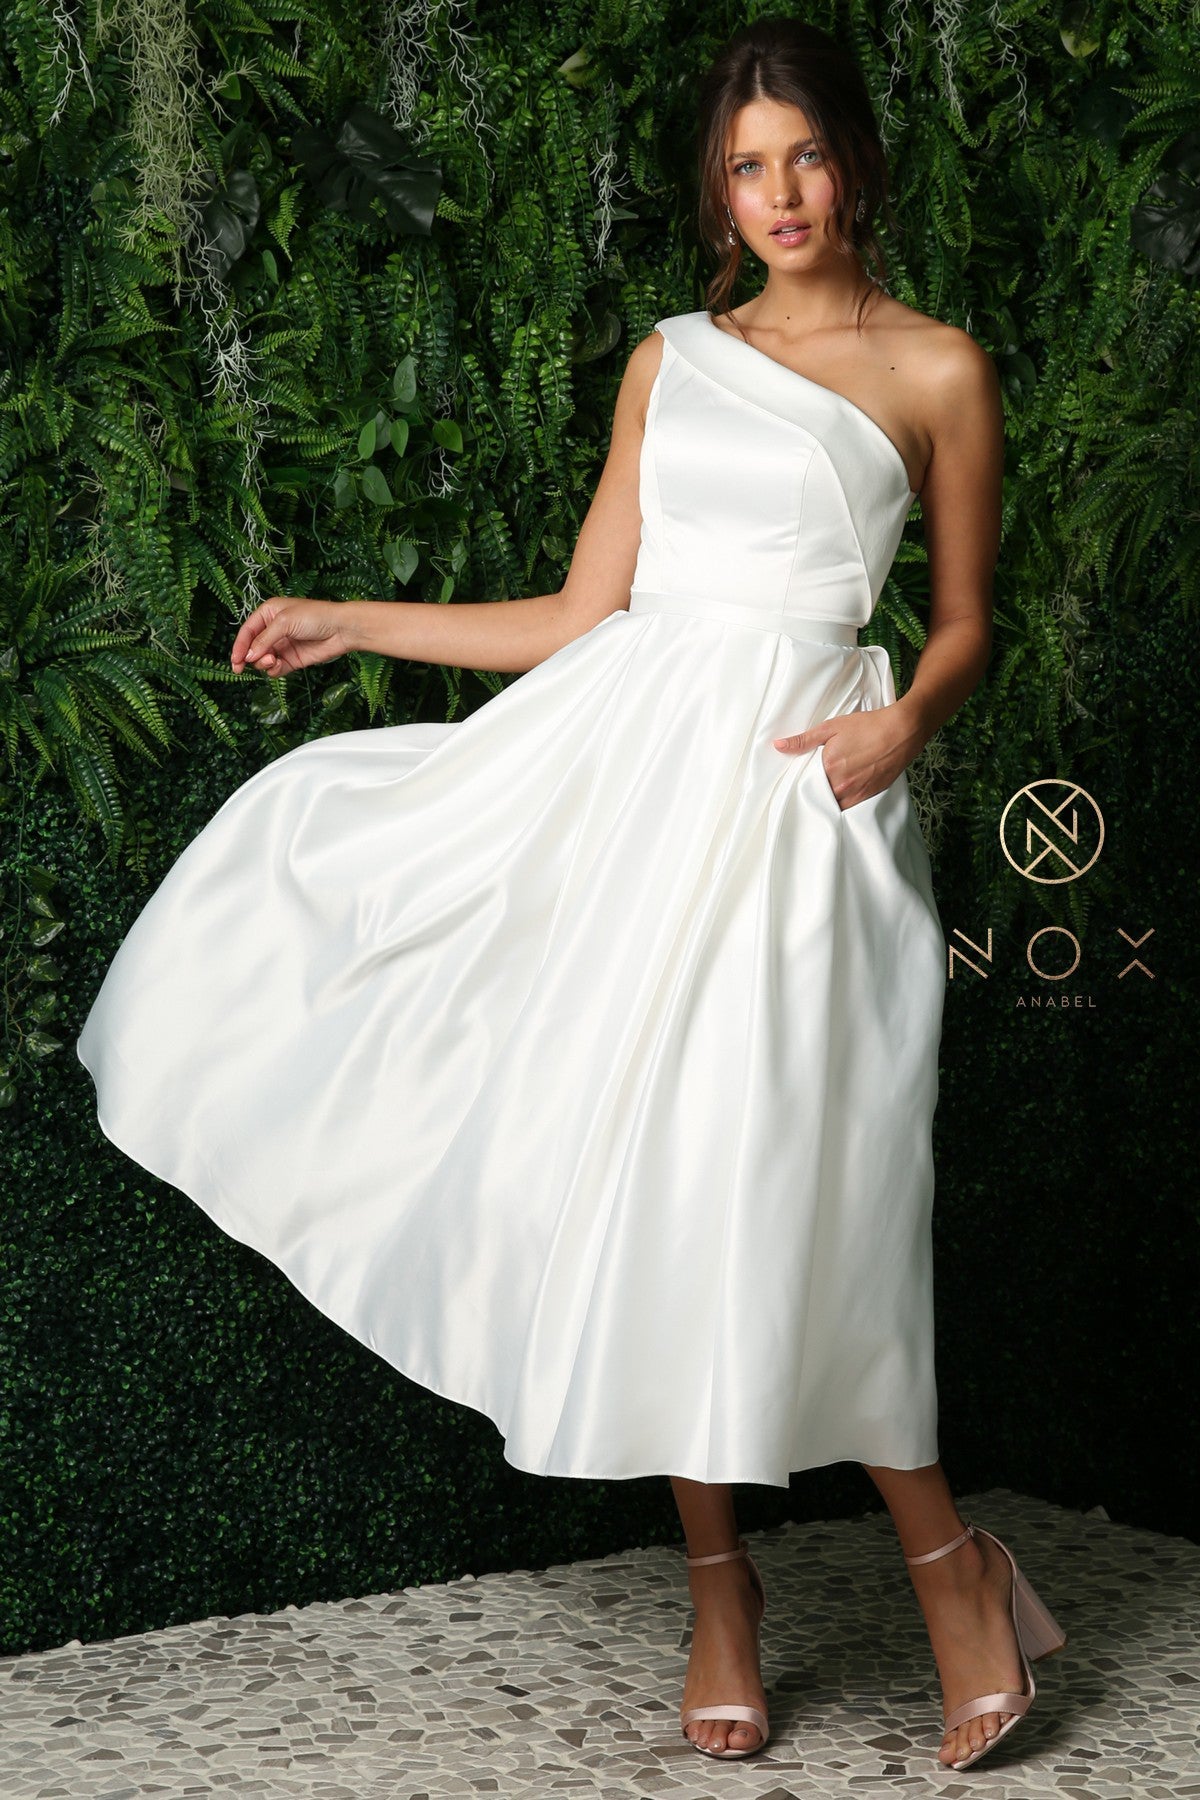 Nox Anabel 931 Short Fitted One Shoulder destination bridal gown. Tea Length Reception Formal Wedding Dress. This Party Gown has Pockets.   Occasions: Cocktail Party, Bridesmaids, Rehearsal Dinner, Prom, Red Carpet, Wedding Guest, Military and Marine Ball, Evening Wear, Formal Gown, Girls' Night Out